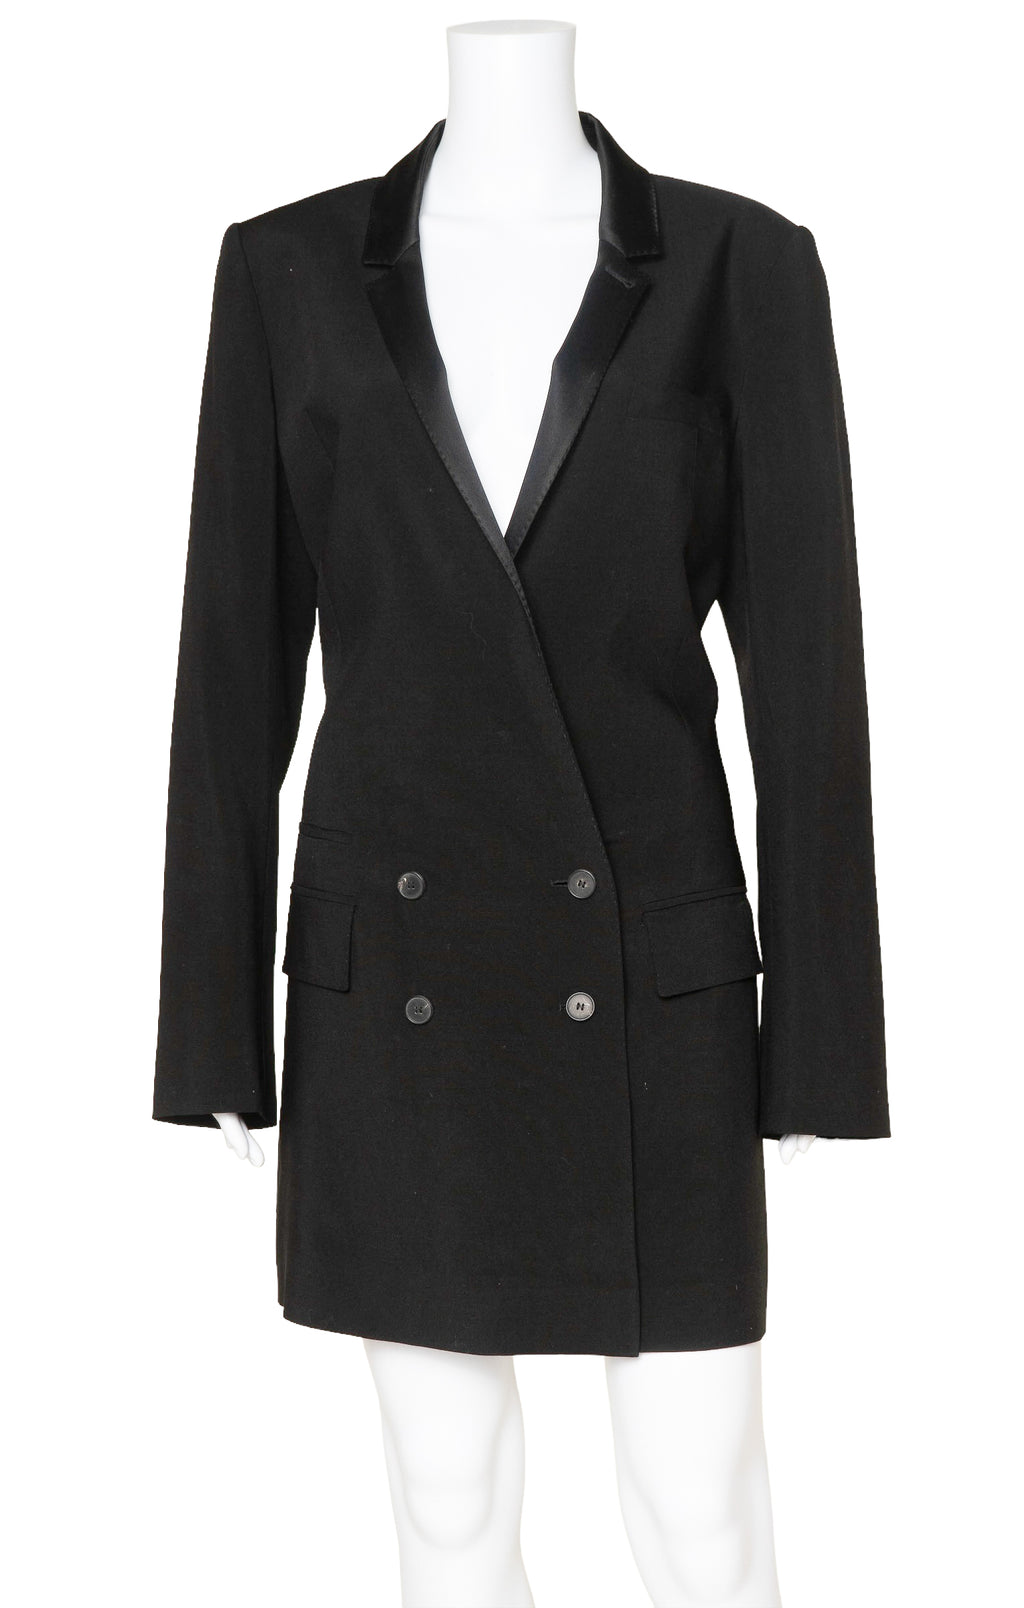 HAIDER ACKERMANN (RARE) Dress / Coat Size: FR 42 / Comparable to US 8-10